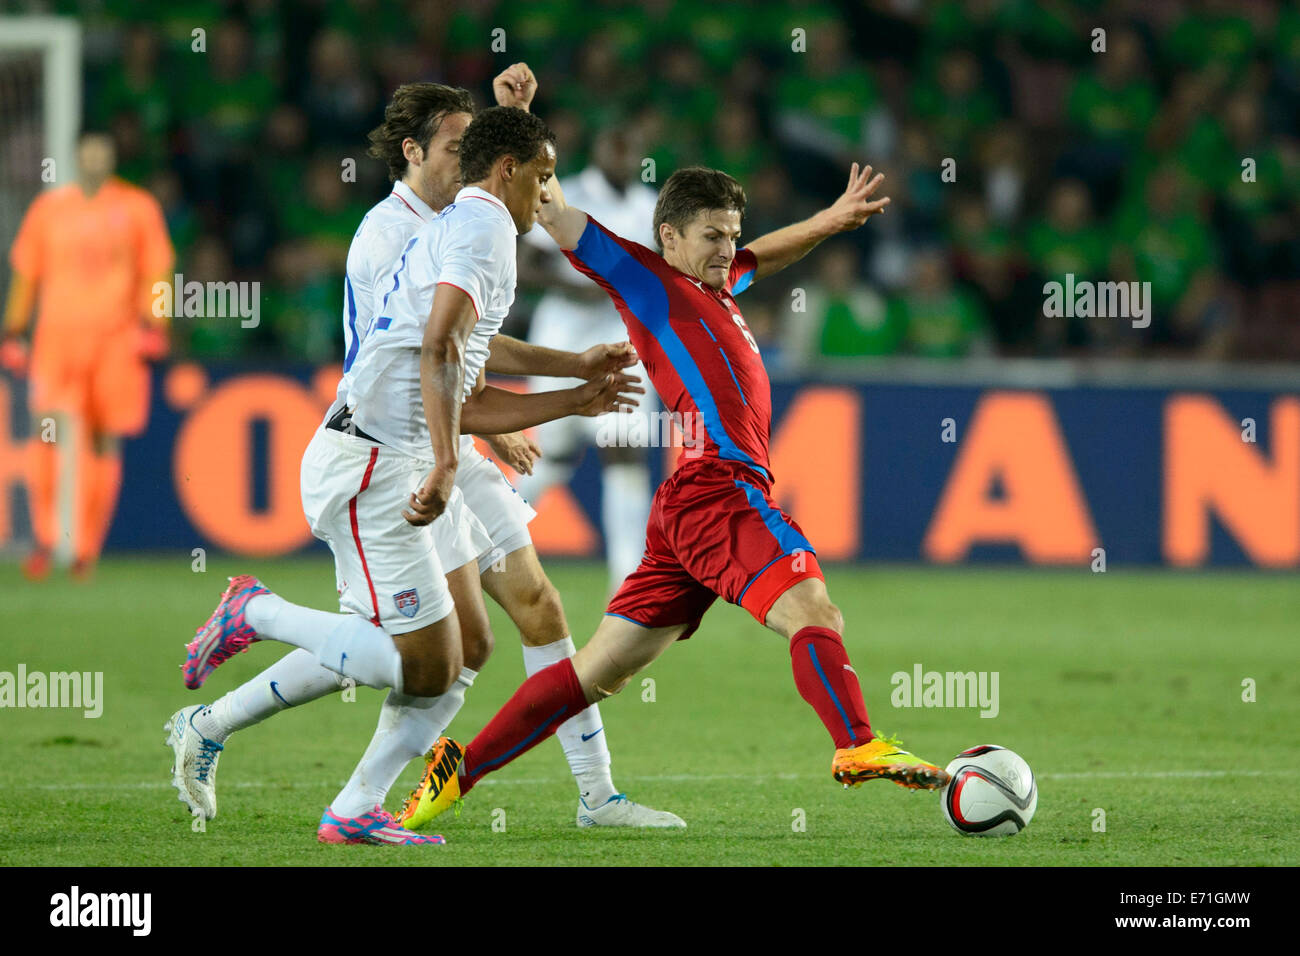 Prague, Czech Republic. 3rd Sep, 2014. From left: Mix Diskerud and Timmy Chandler of USA and Vaclav Pilar of Czech Republic fight for a ball during the soccer friendly match Czech Republic vs USA in Prague, Czech Republic, September 3, 201 Credit: © Michal Kamaryt/CTK Photo/Alamy Live News  Stock Photo